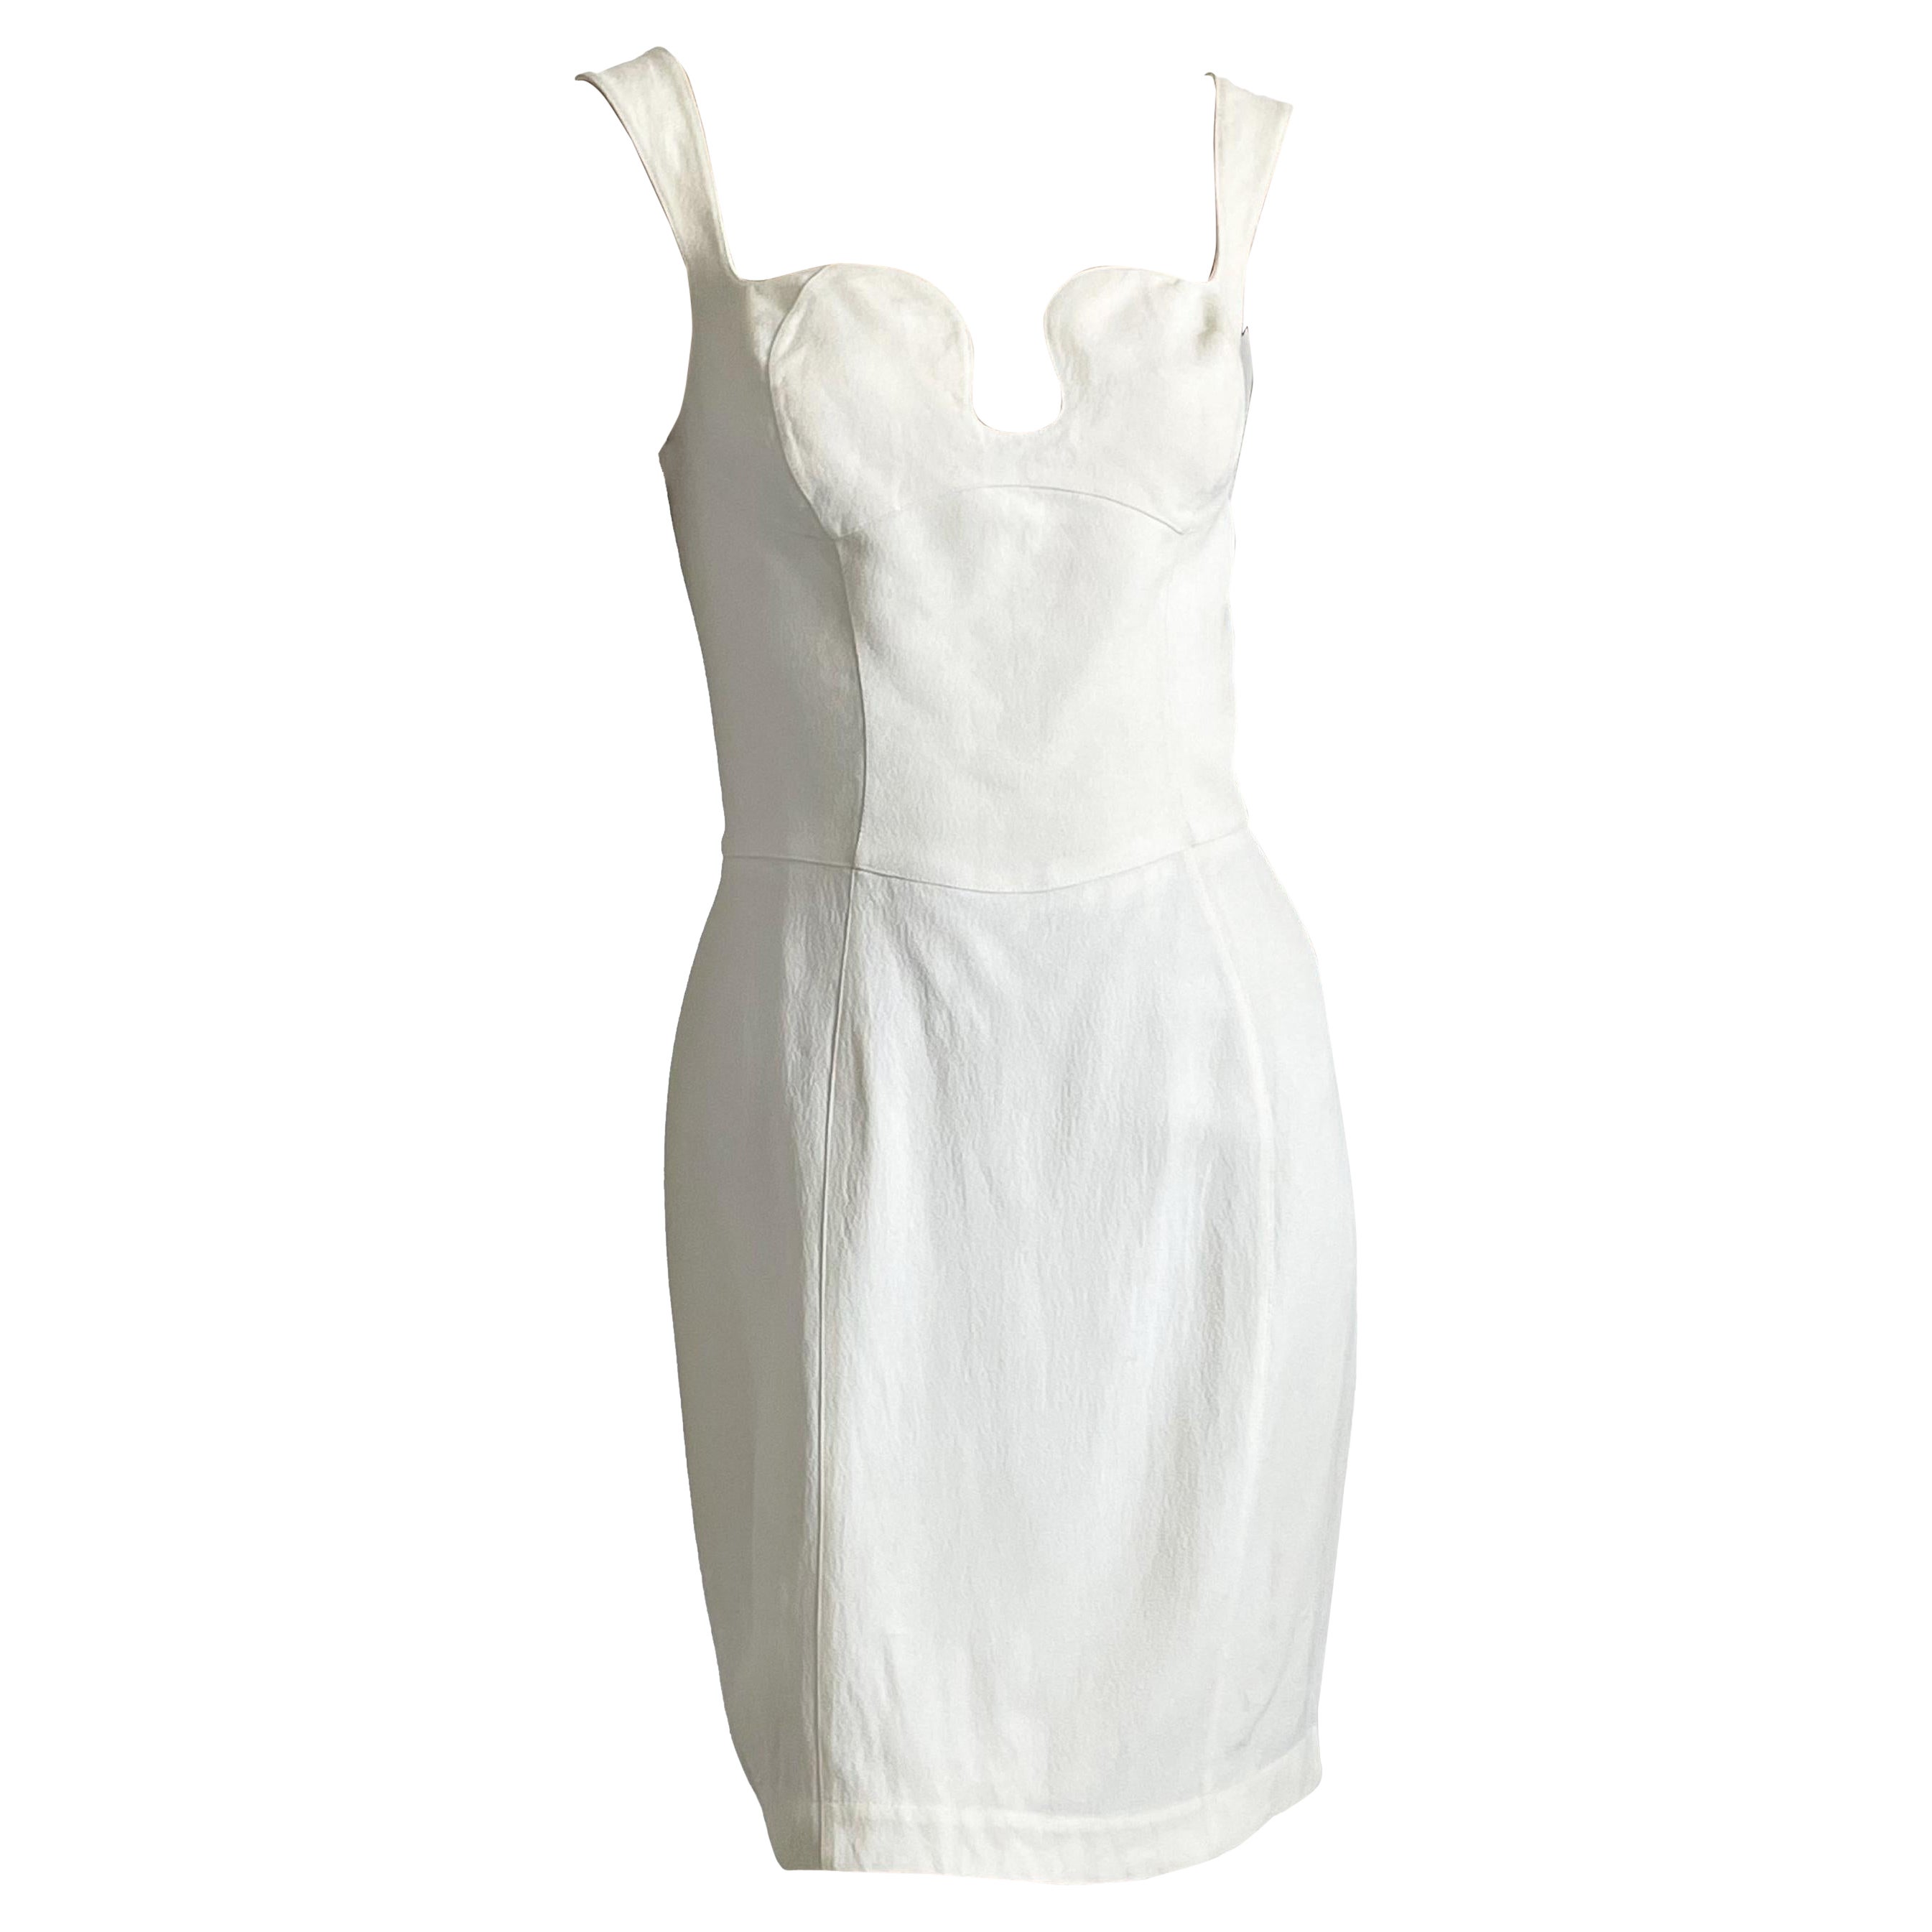 Thierry Mugler Cocktail Dress White Crepe Sculptural Chic Vintage 90s Sz 40 HTF For Sale